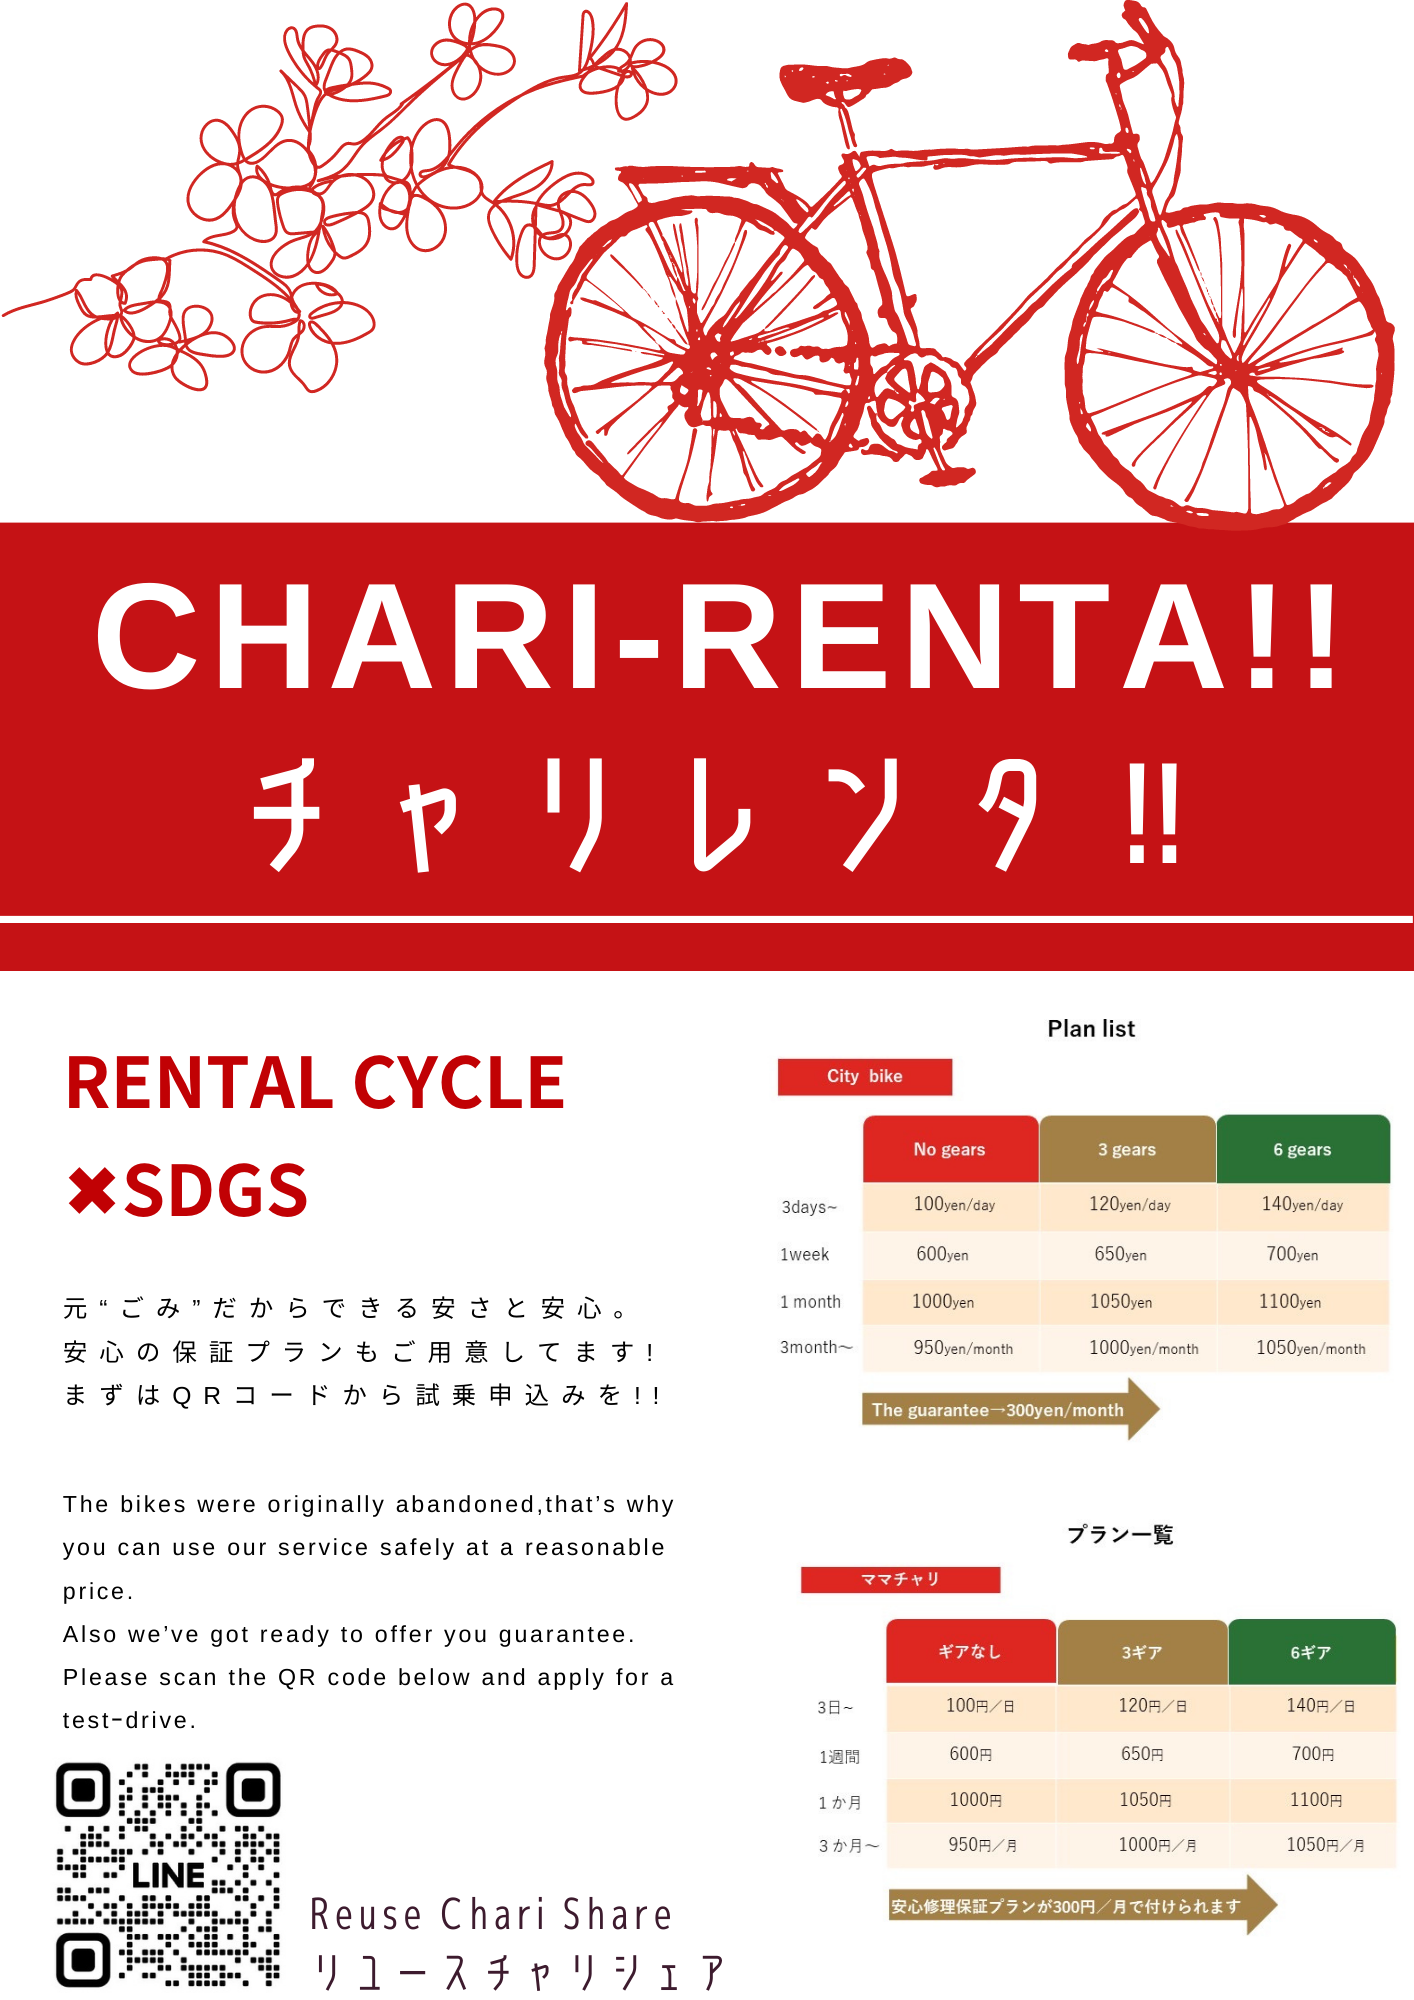 Which bike would you choose? Environmentally friendly rental bicycles are now available!! あなたはどの自転車にする？環境に優しいレンタサイクル実施中です！！【リユースチャリシェア Reuse Chari Share】